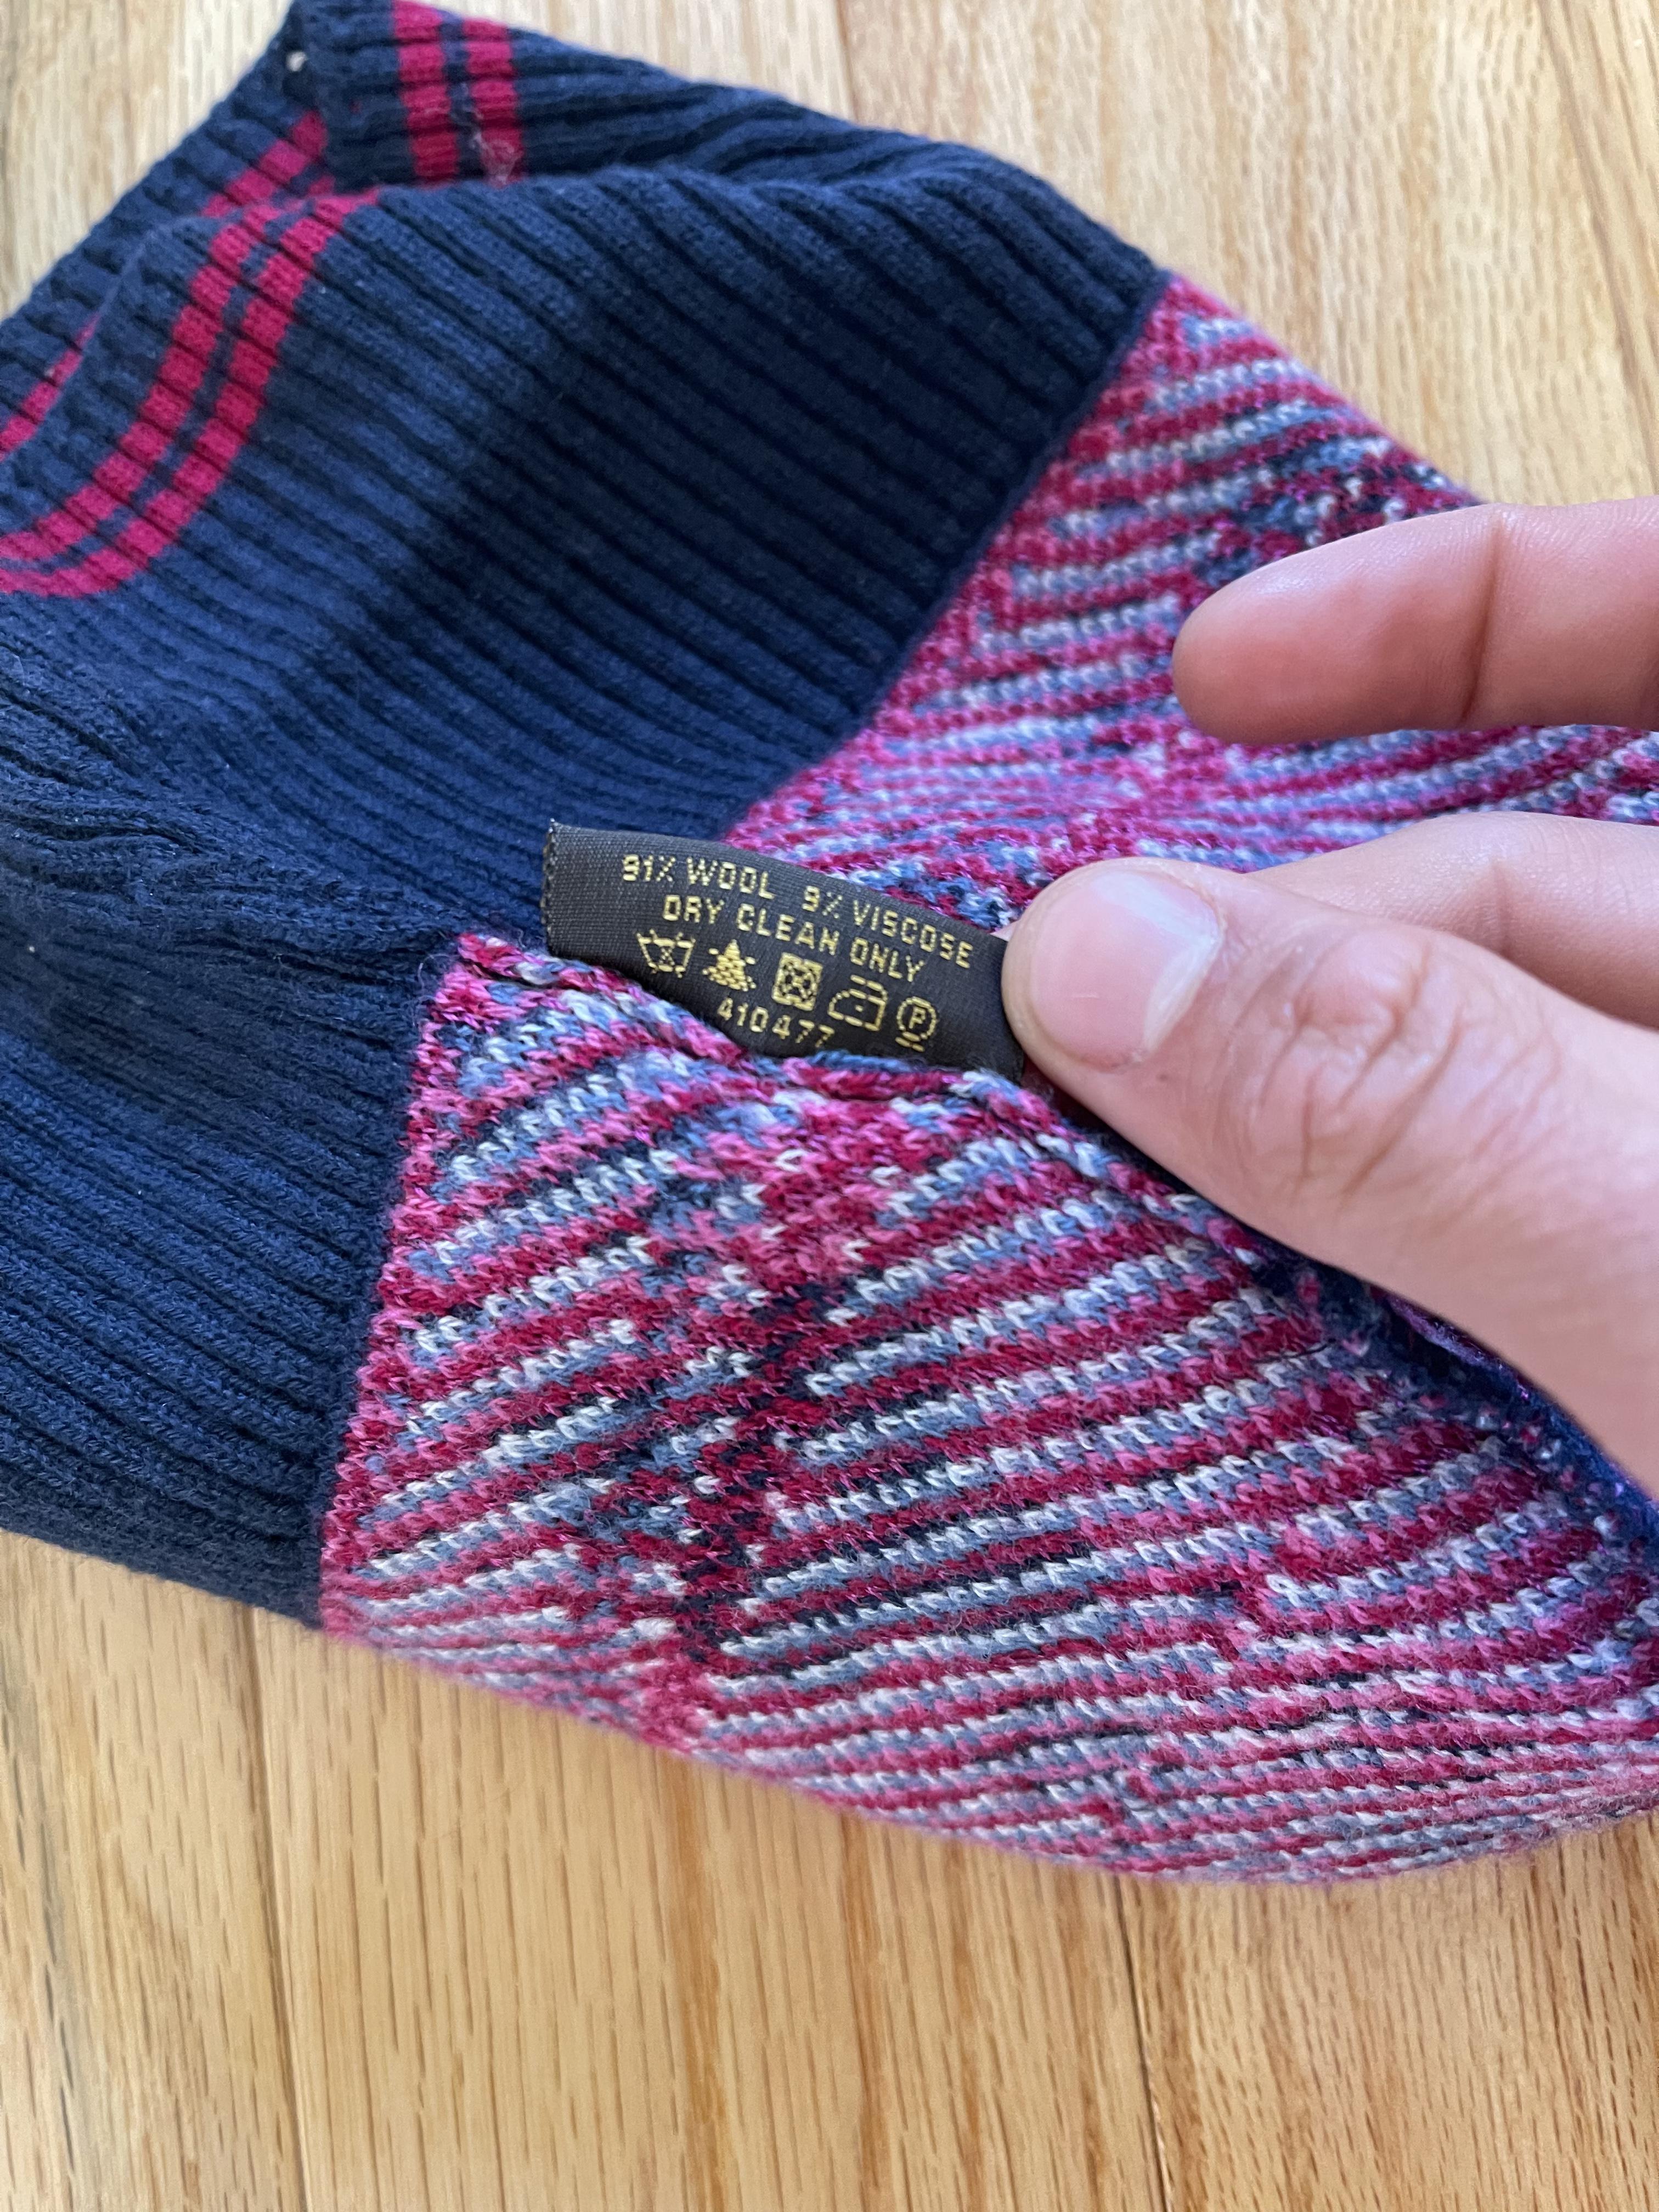 Louis Vuitton by Marc Jacobs Wool Beanie  Reissue: Buy & Sell Designer,  Streetwear & Vintage Clothing for Men & Women